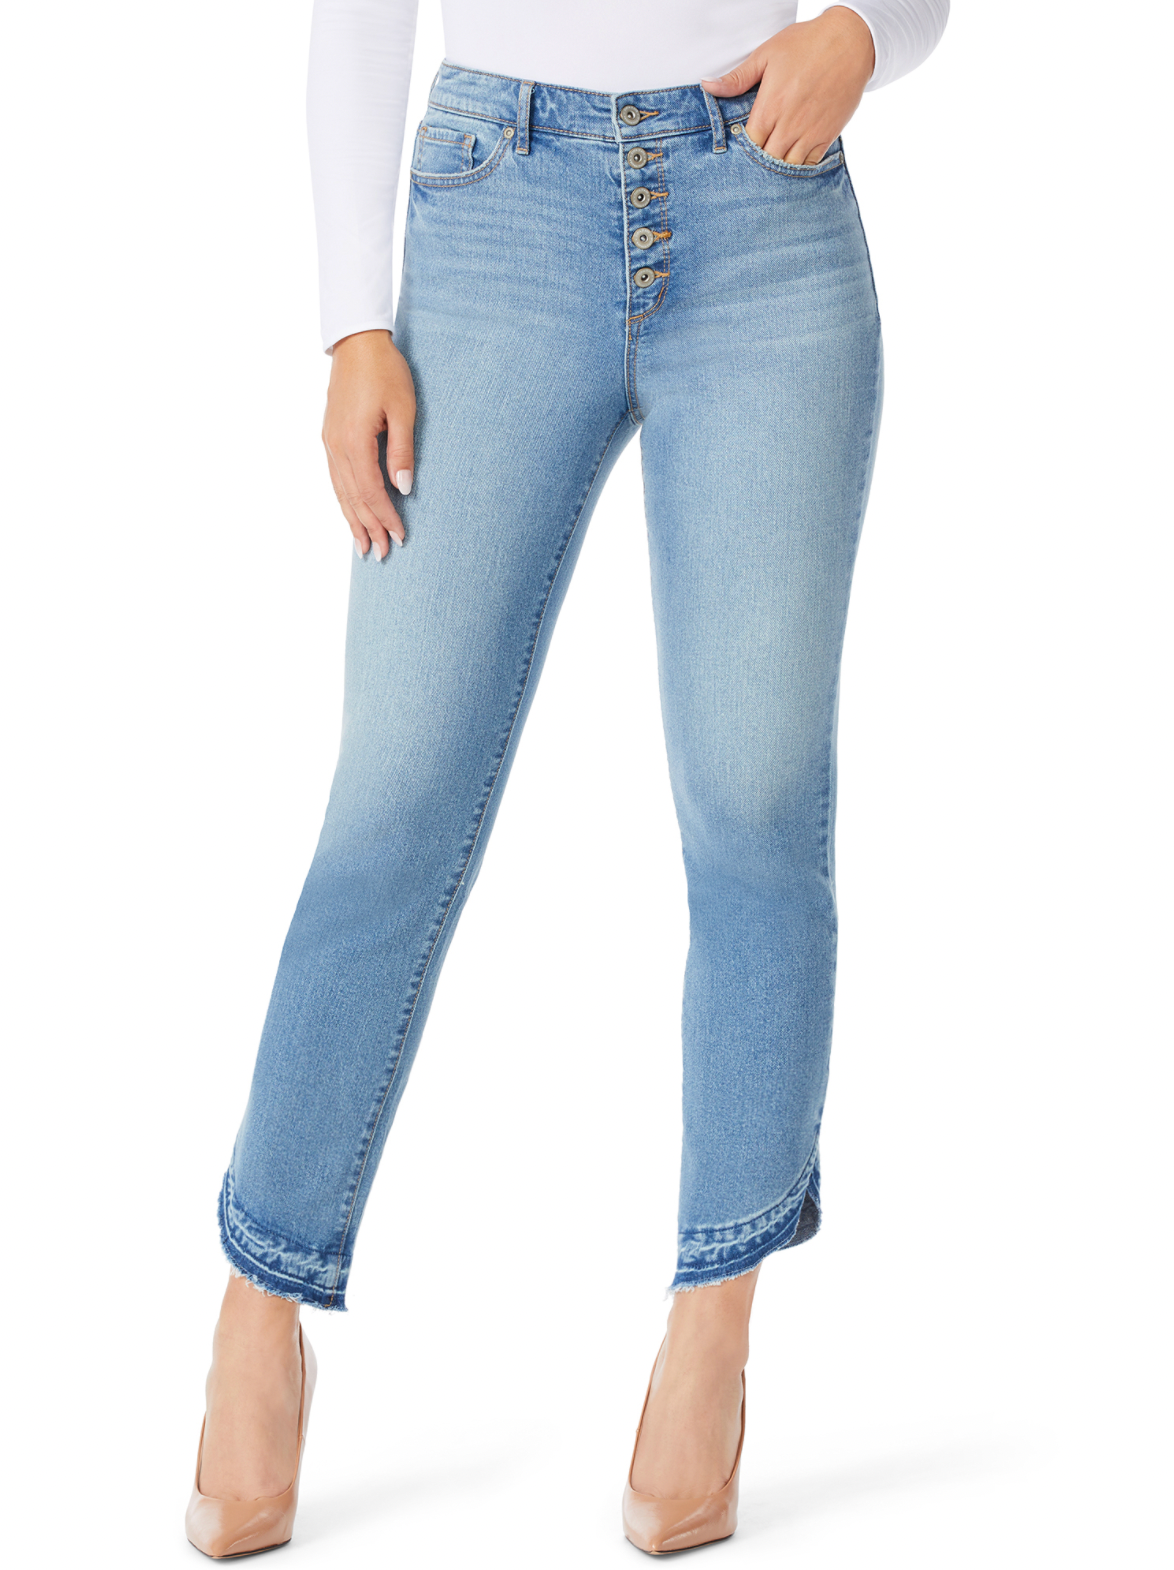 Sofia Jeans by Sofia Vergara ROSA curvy ankle high rise Size 4 in 2023